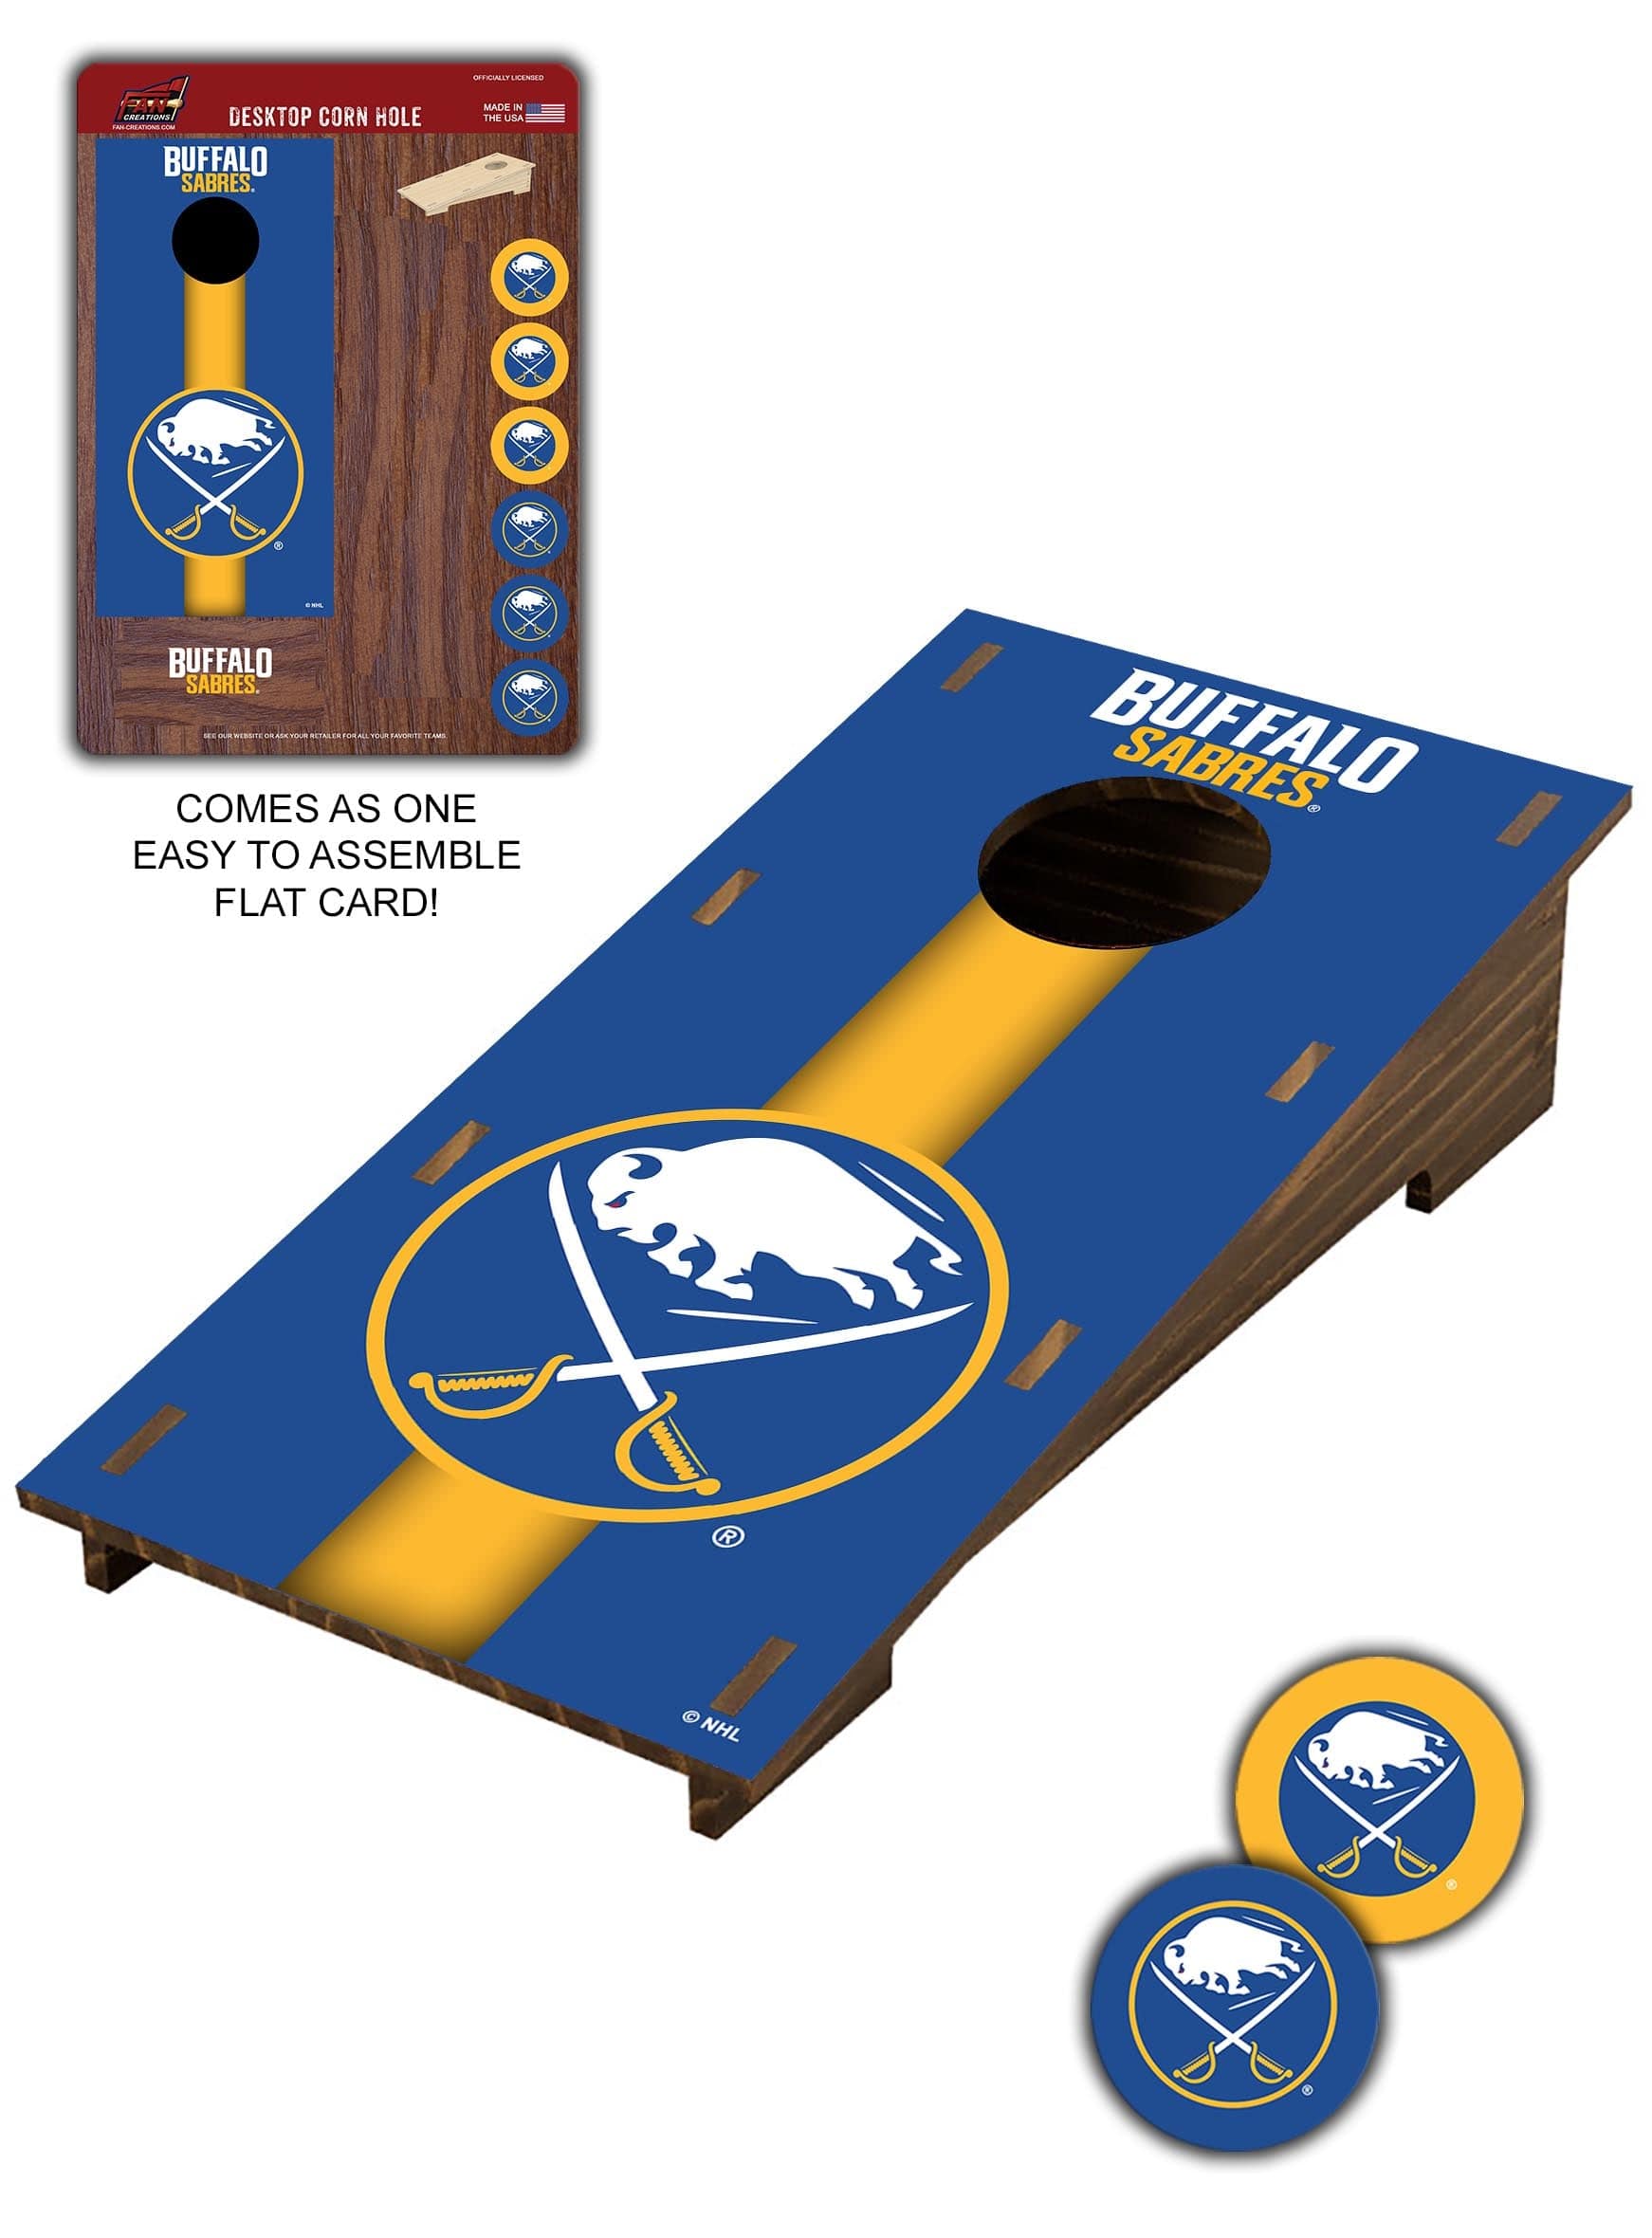 who did it better? 2020 or 2022? : r/sabres - Buffalo